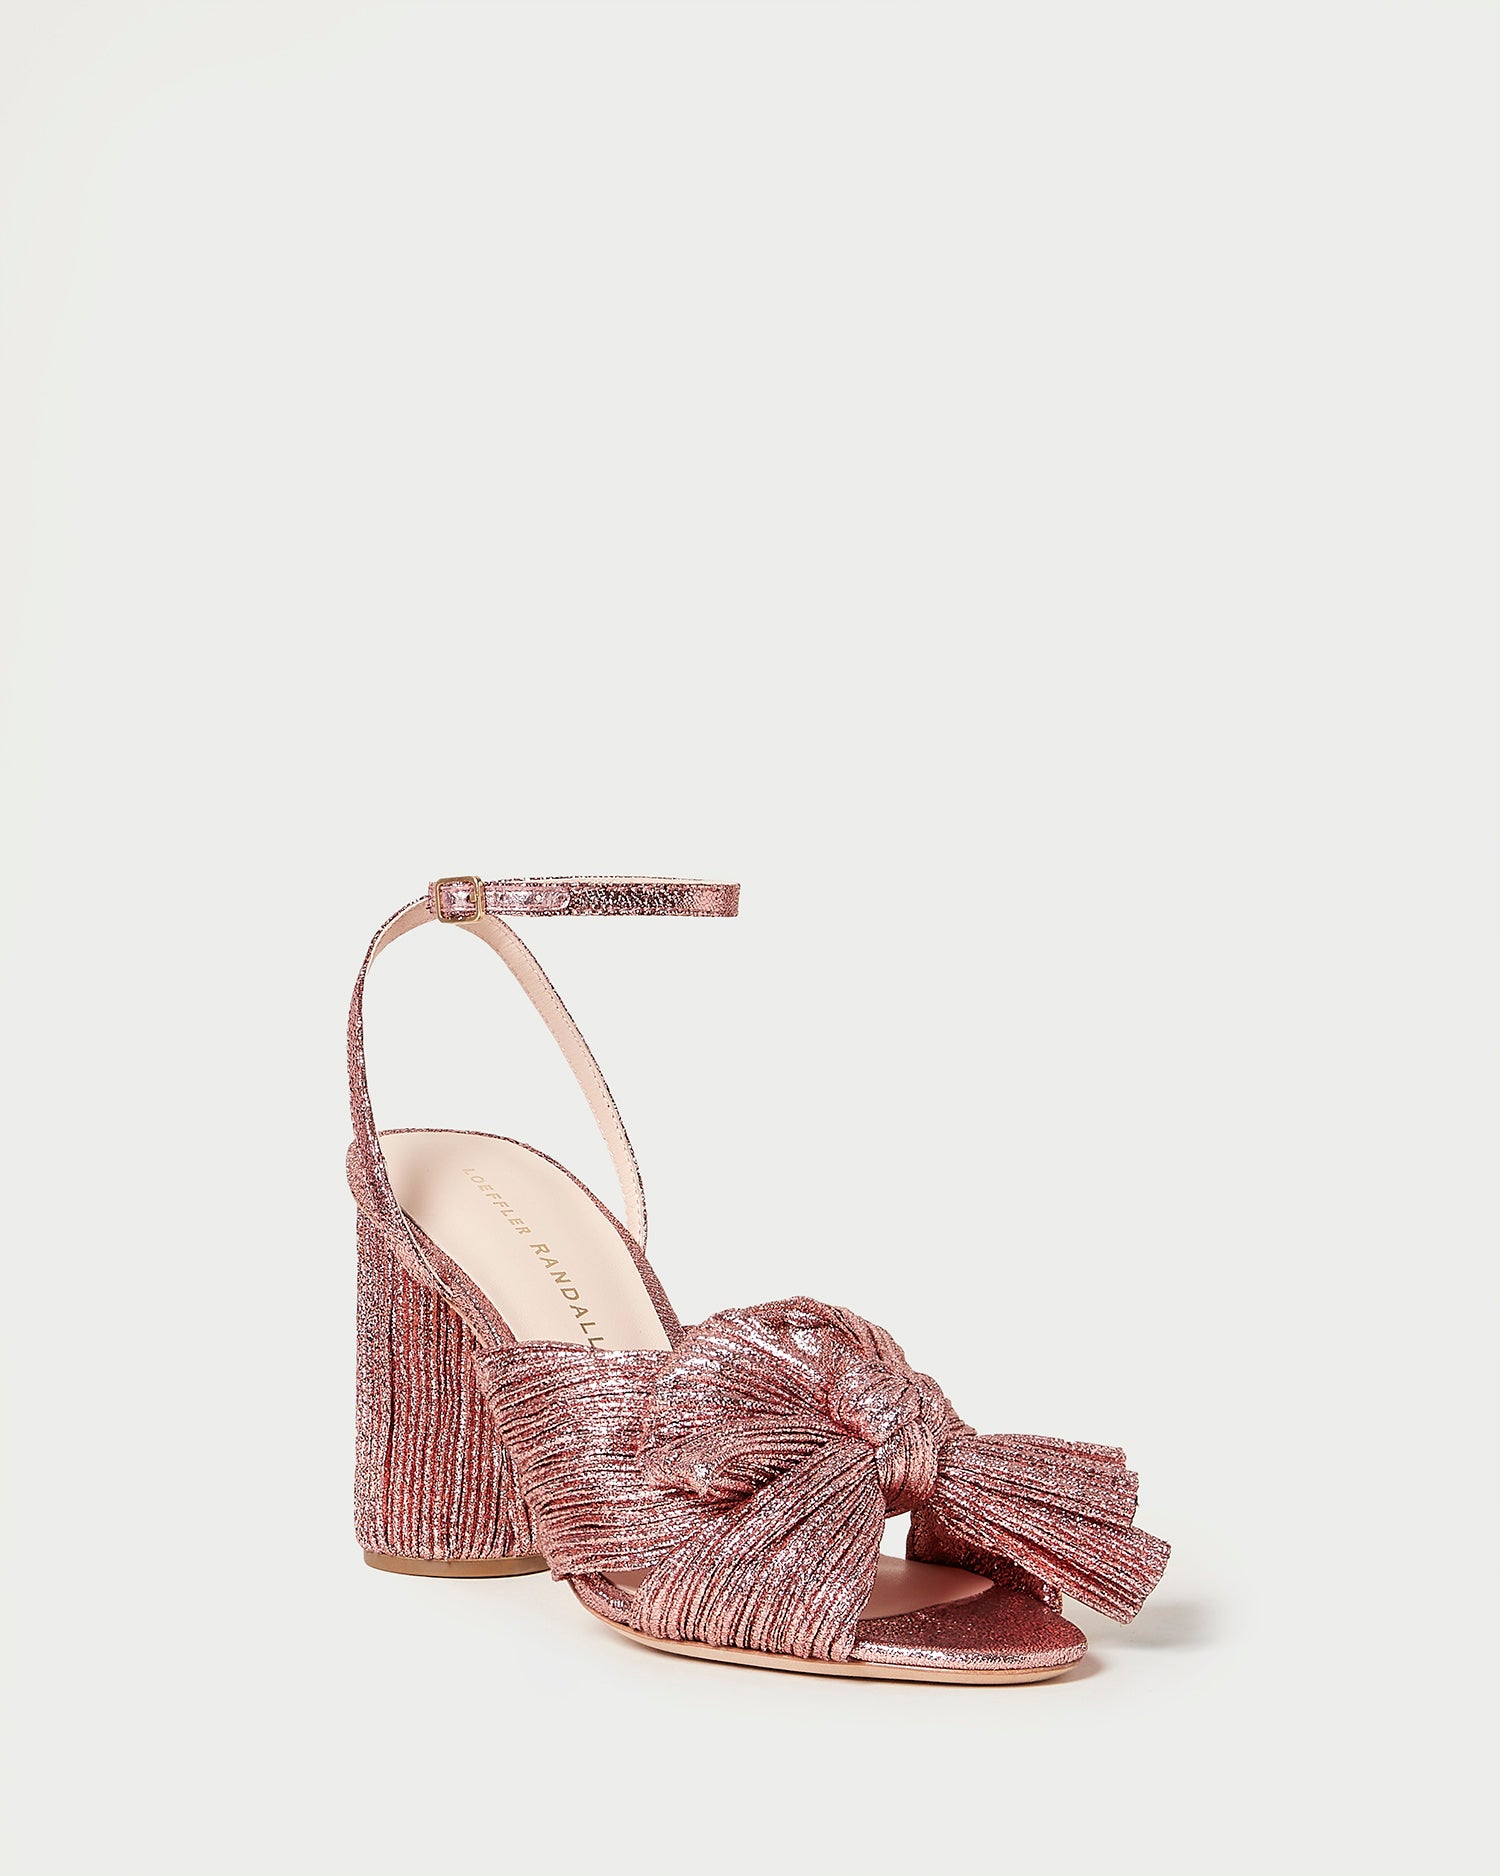 Loeffler Randall Shop the Camellia Rose Pleated Bow Heel at 